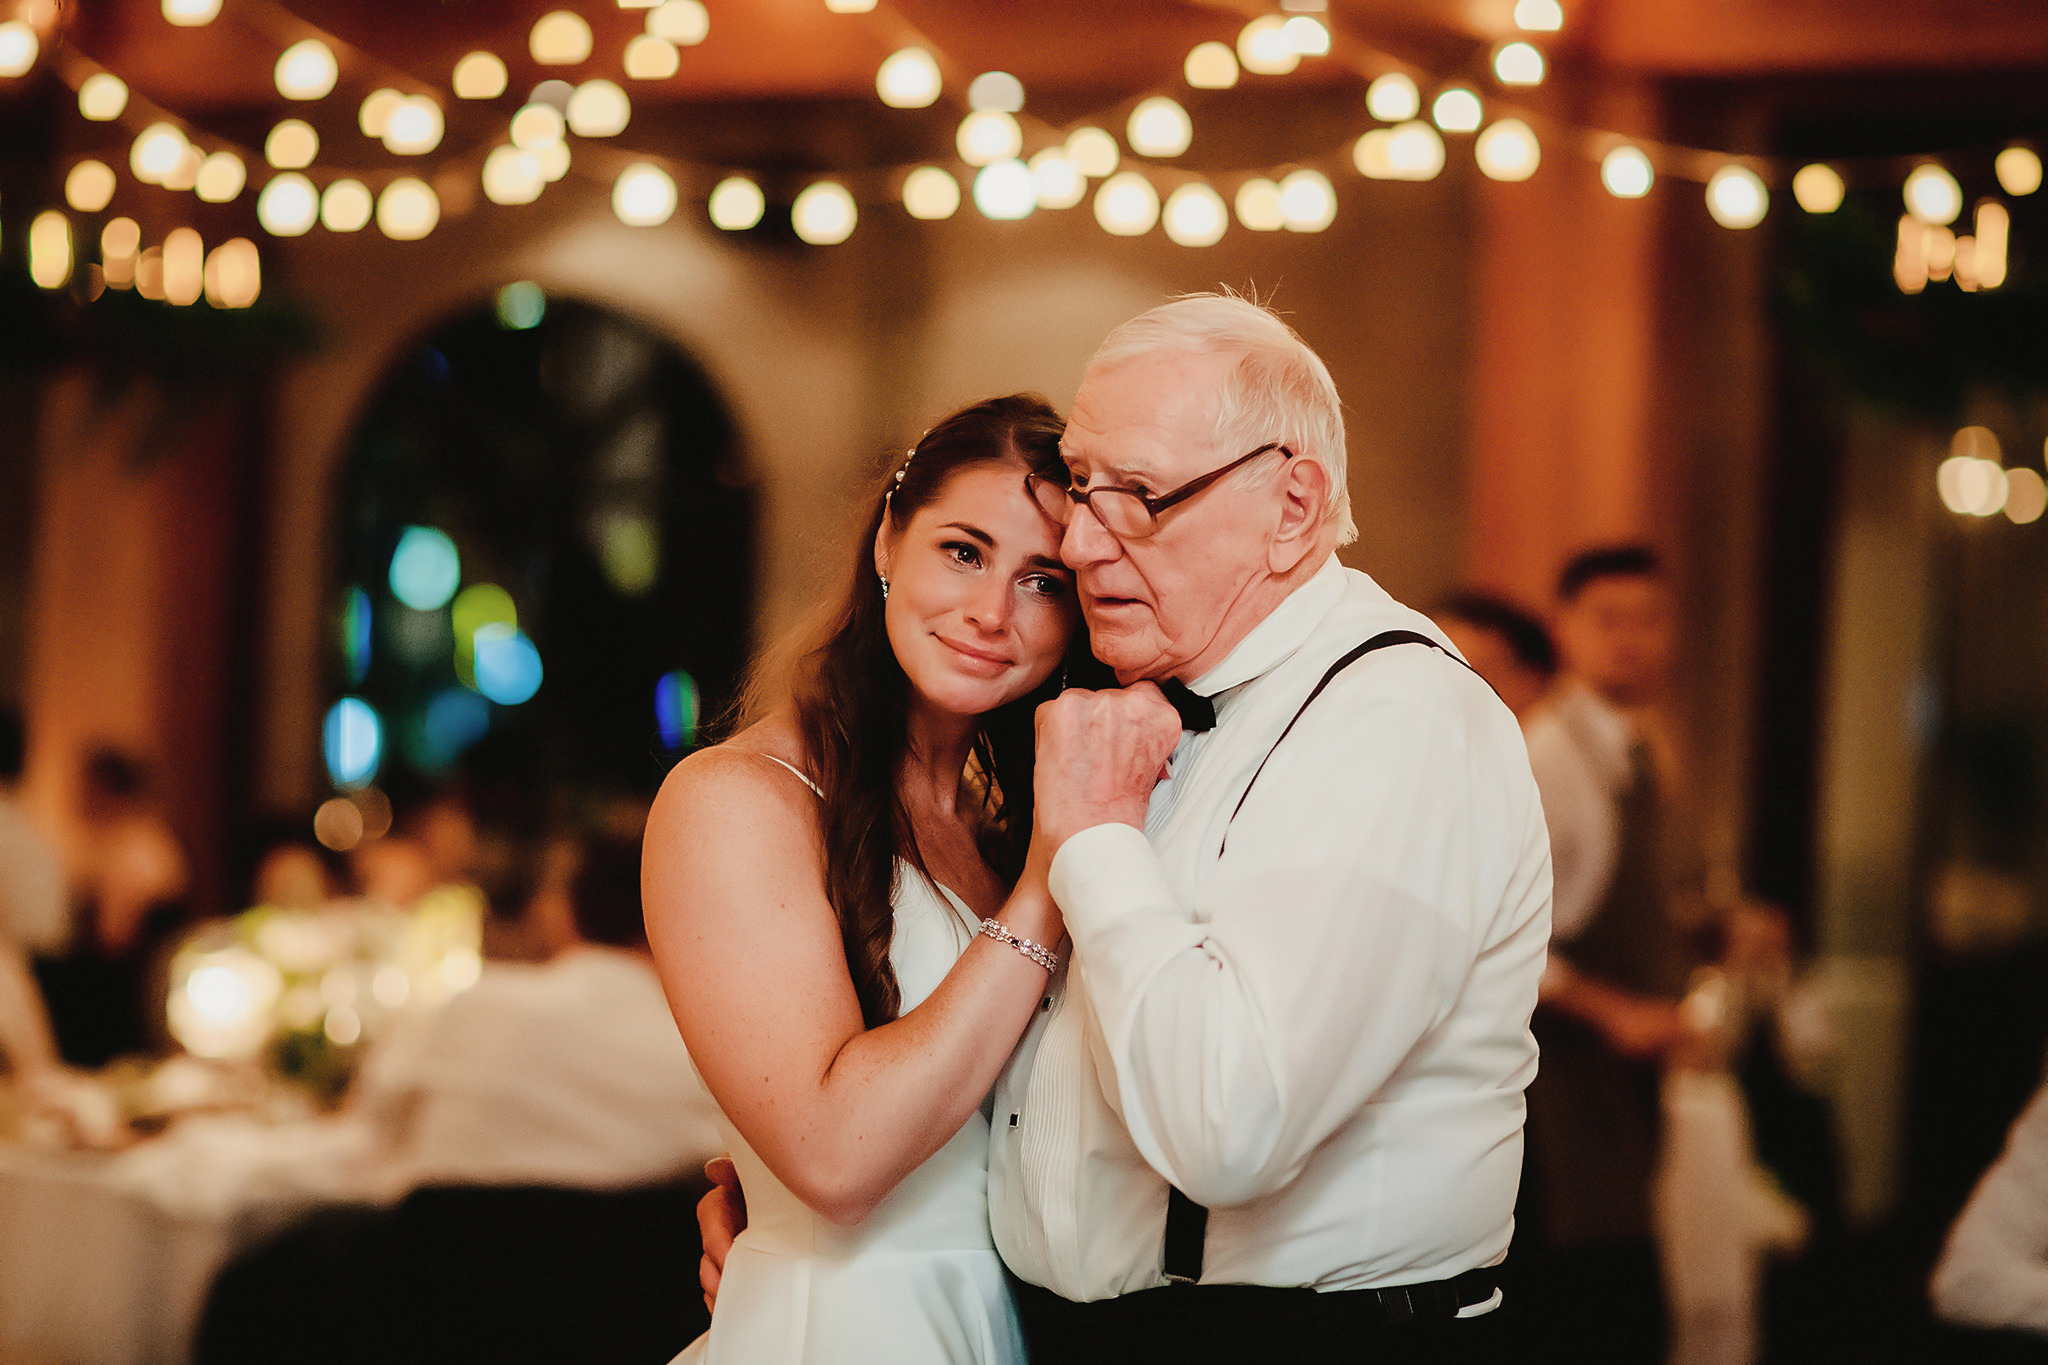 Bride getting emotional dancing with grandfather